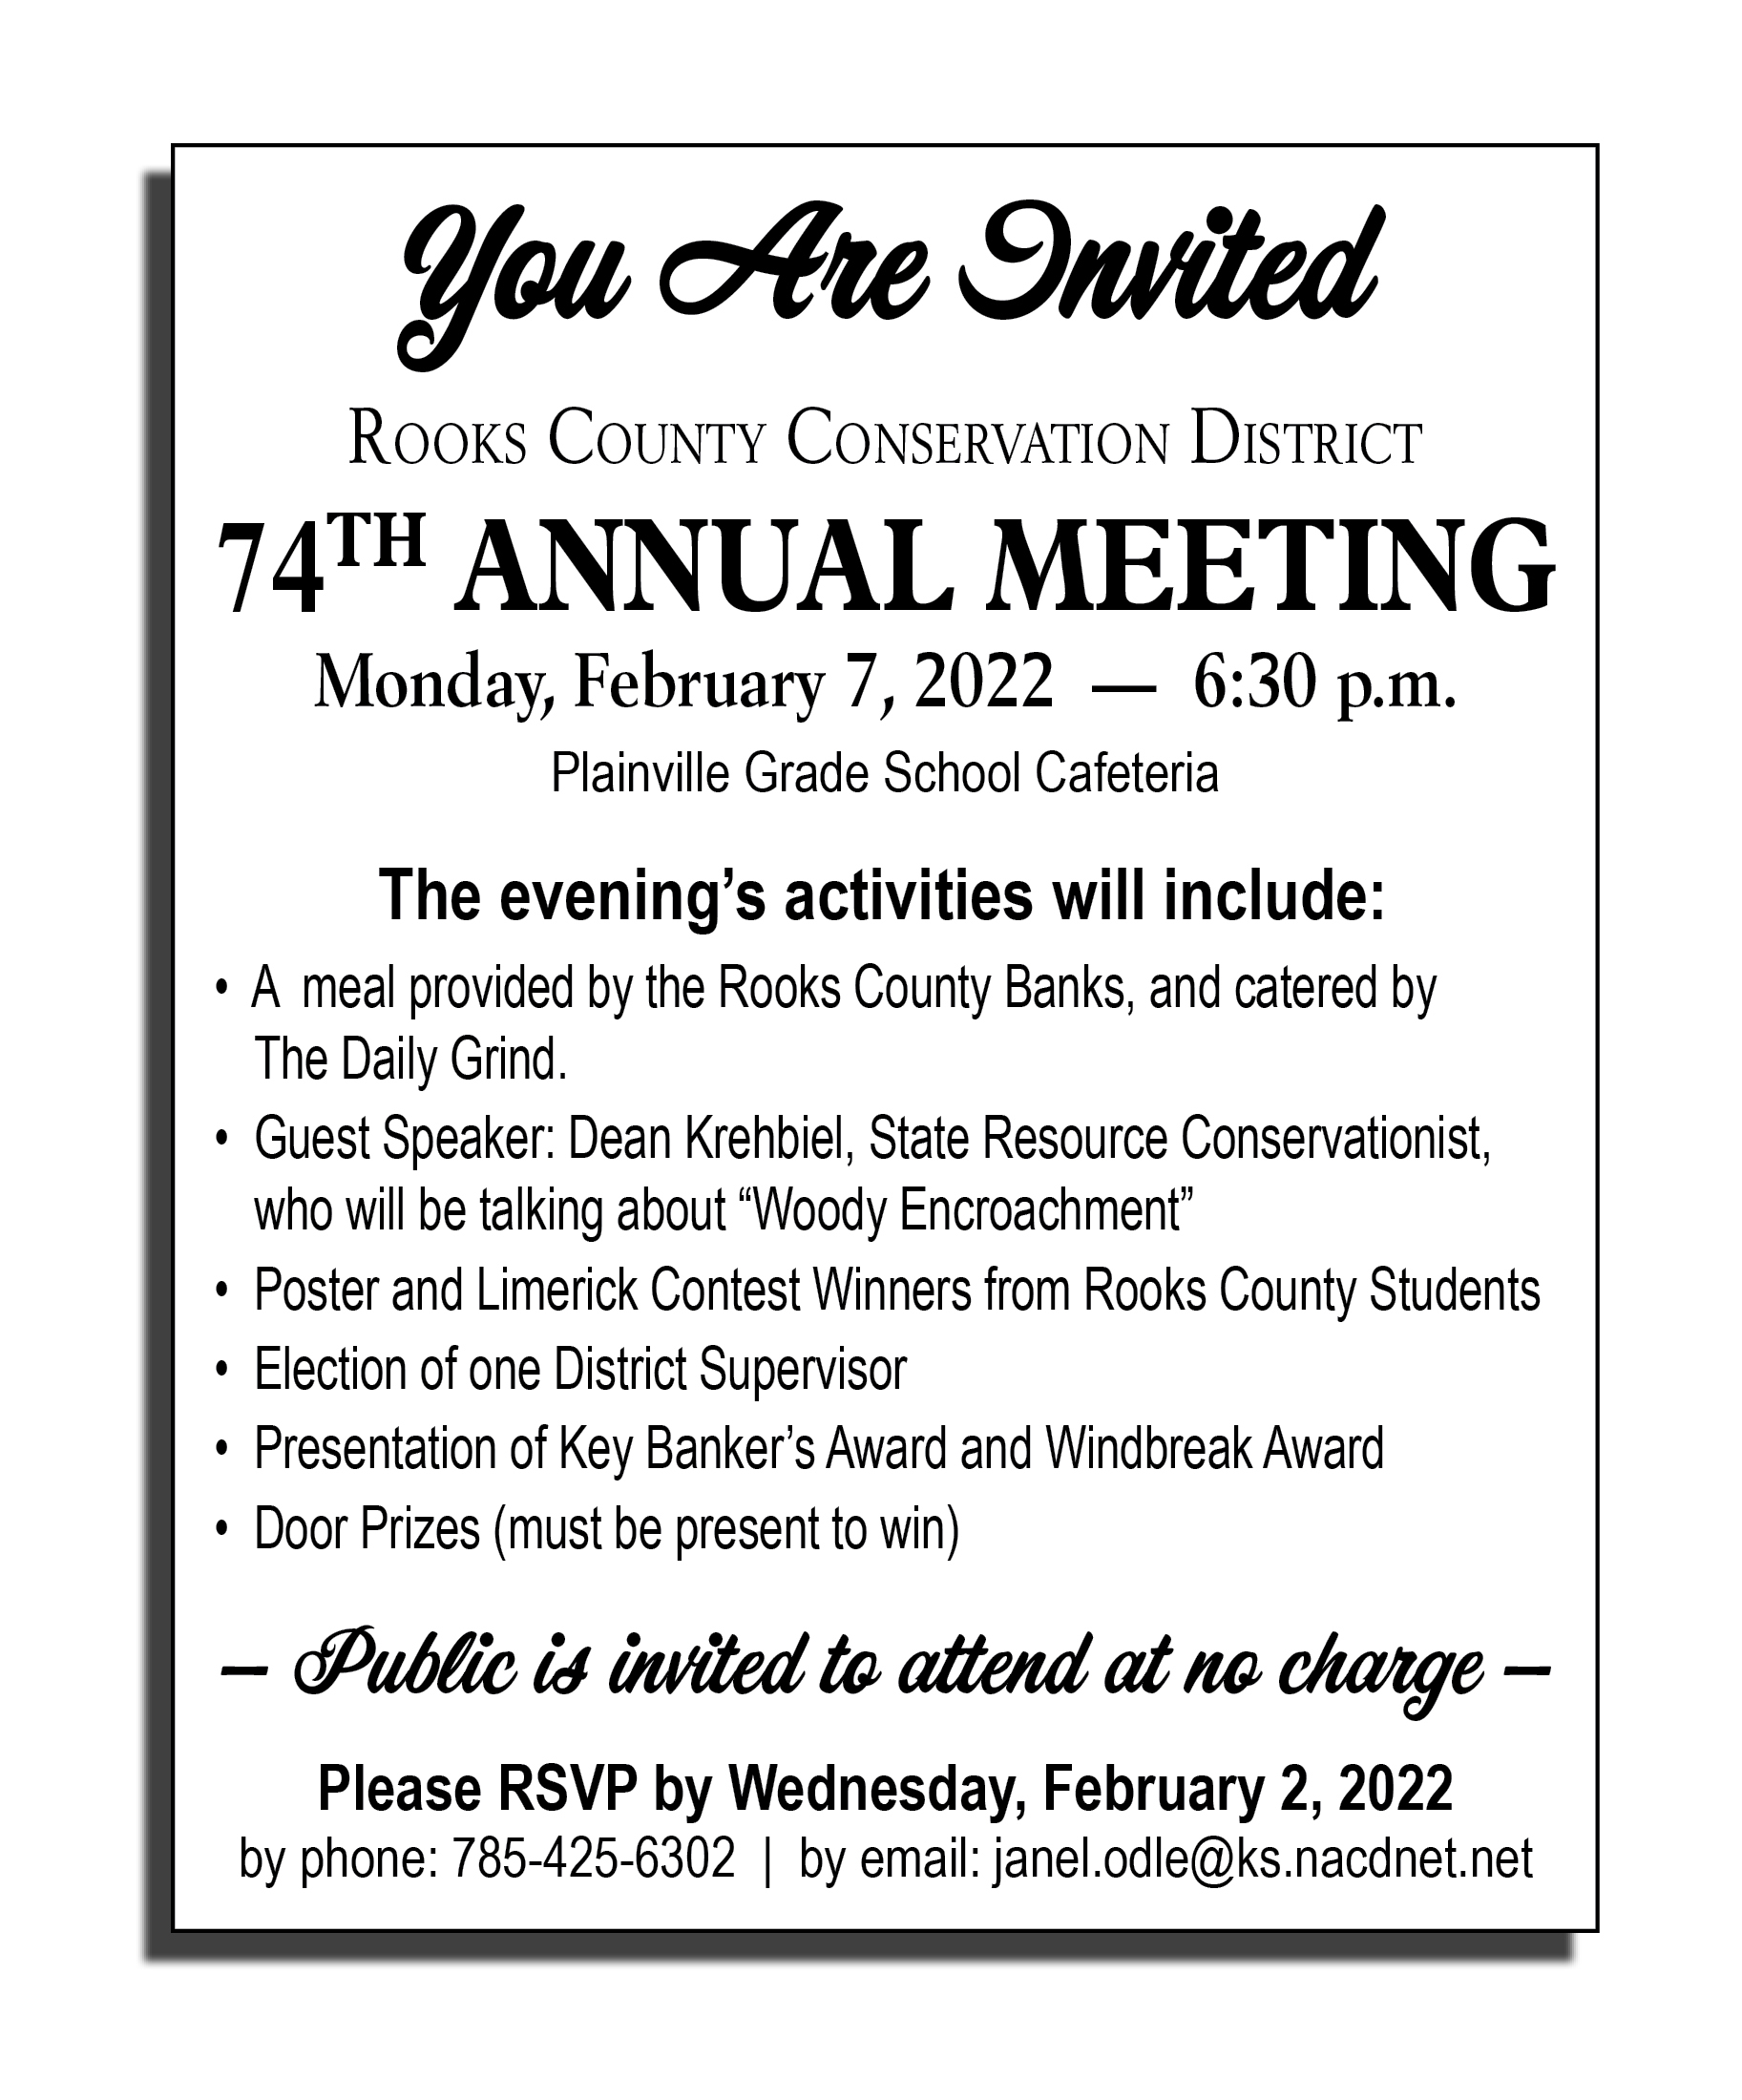 Rooks County Conservation District 74th annual meeting set for Monday